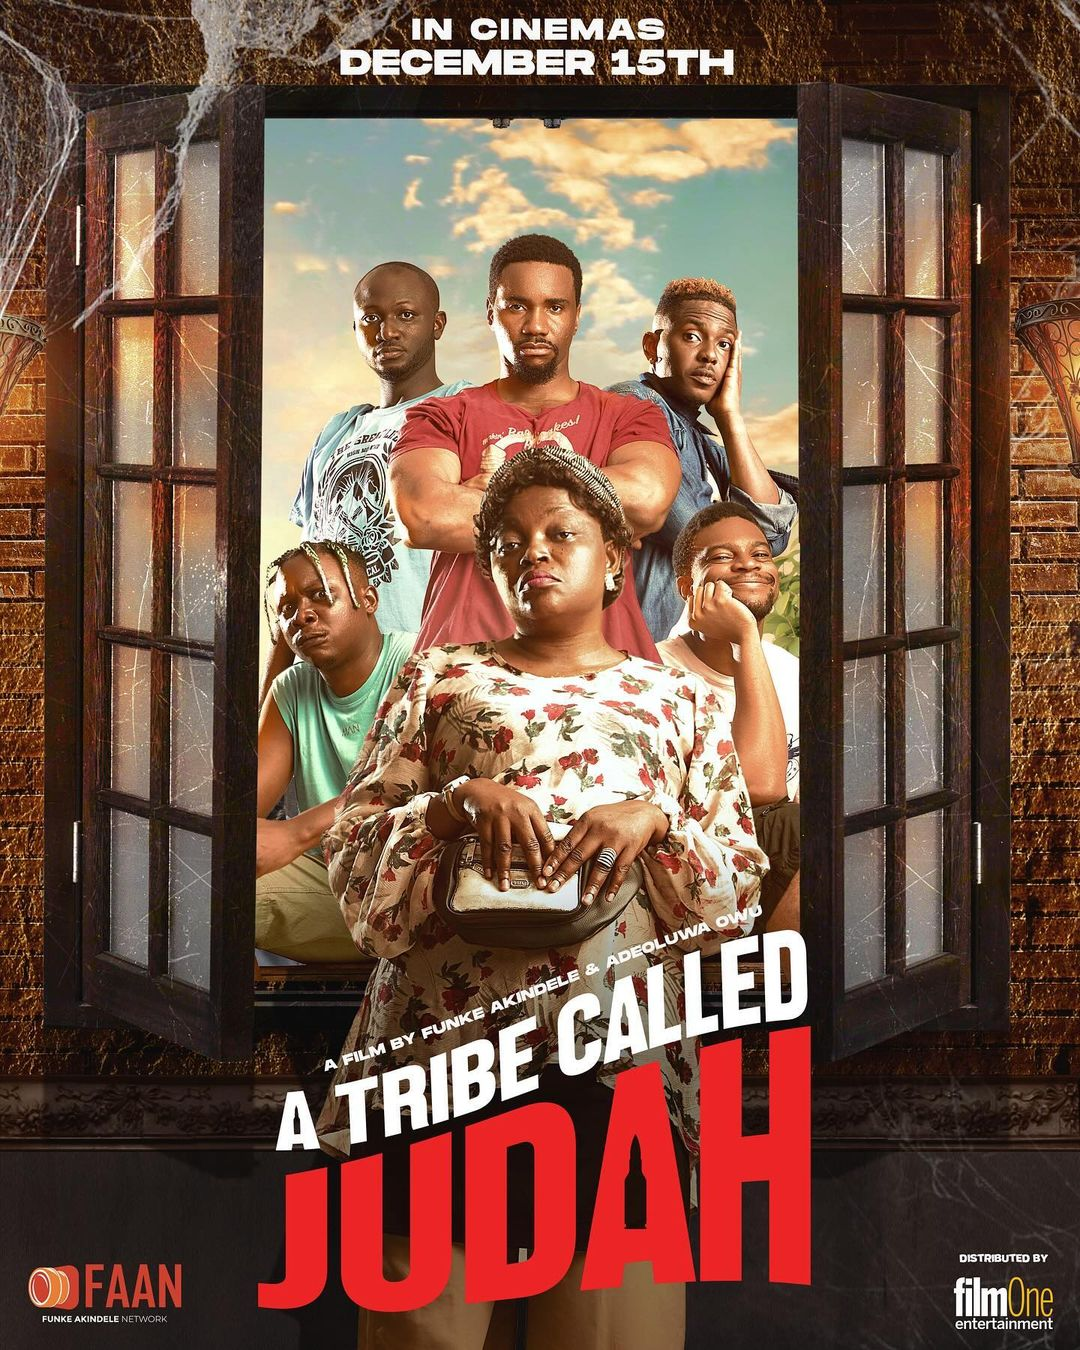 A tribe called Judah poster with Jenifa, Olumide Oworu, abd others in the picture.